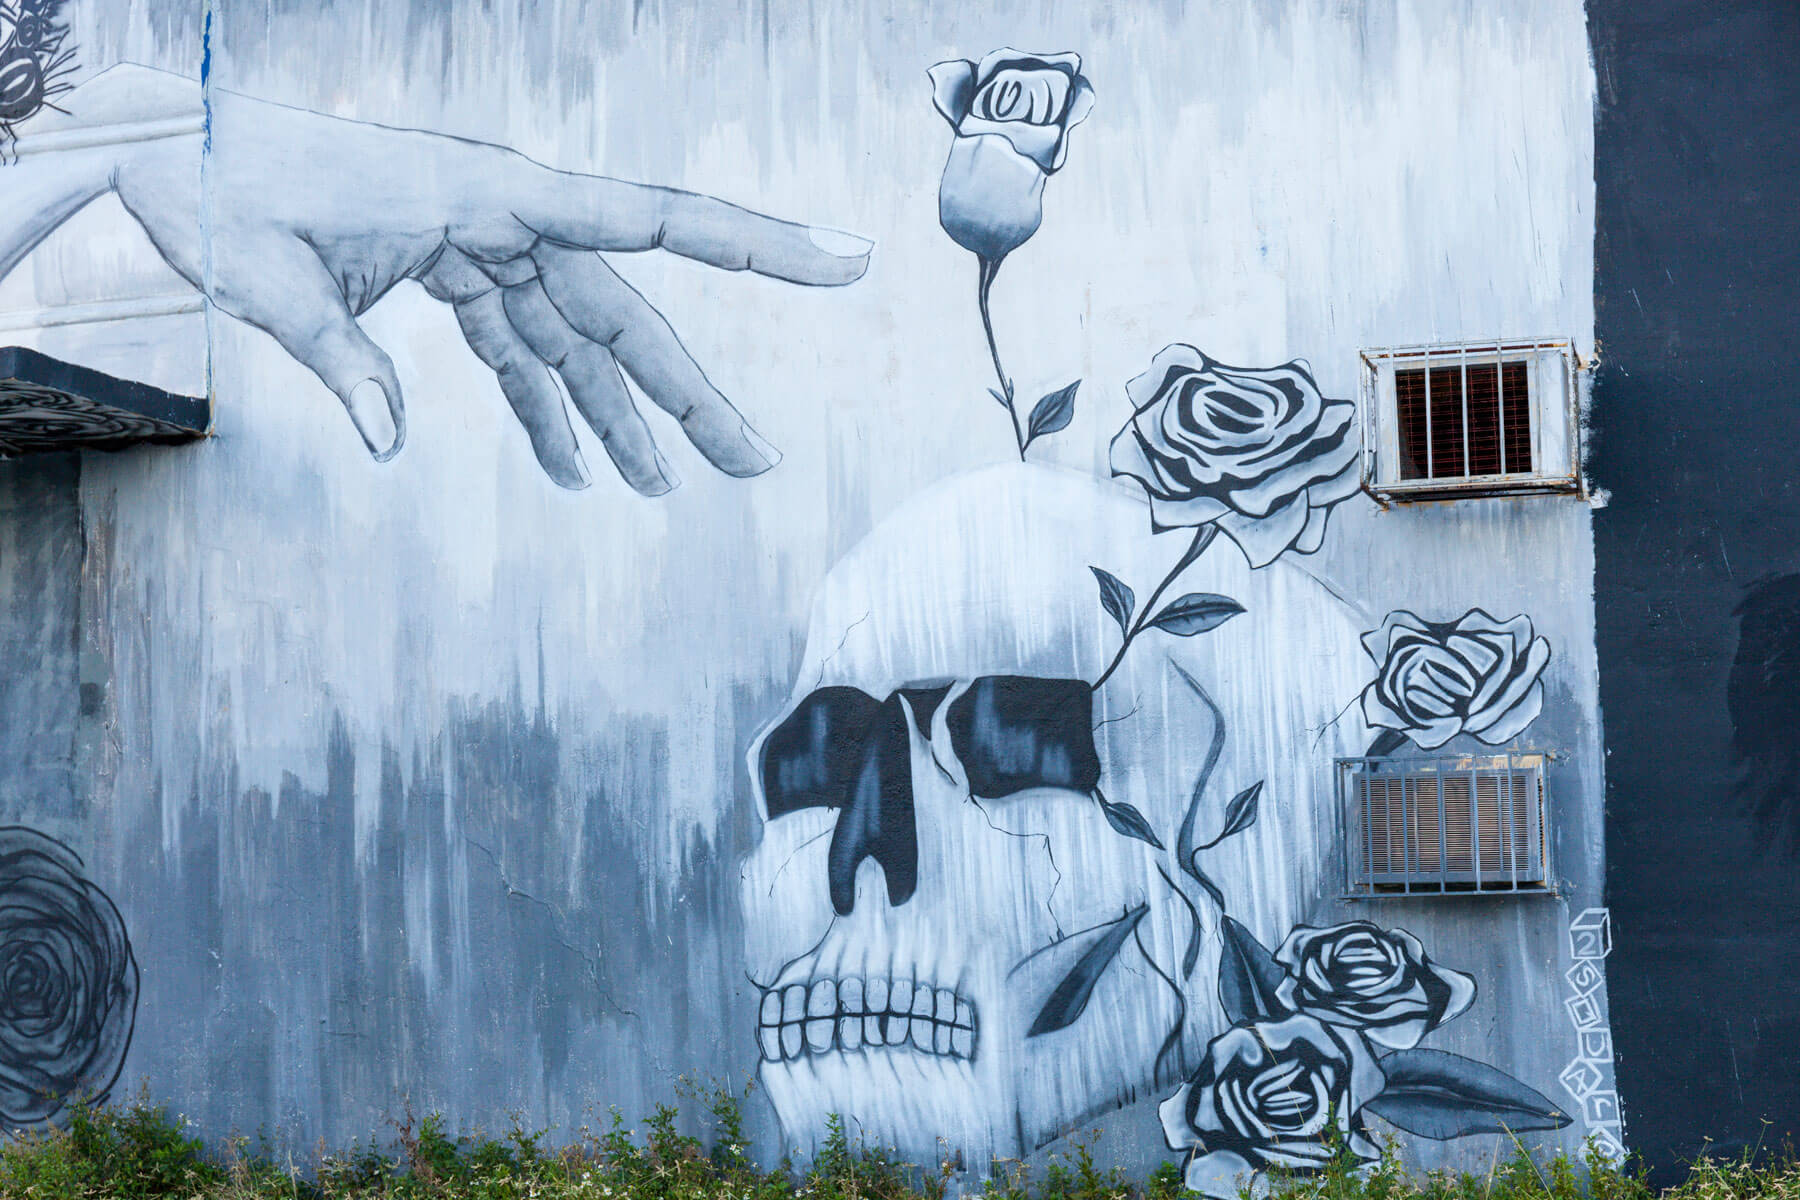 Graffiti mural of a hand reaching a skull with roses